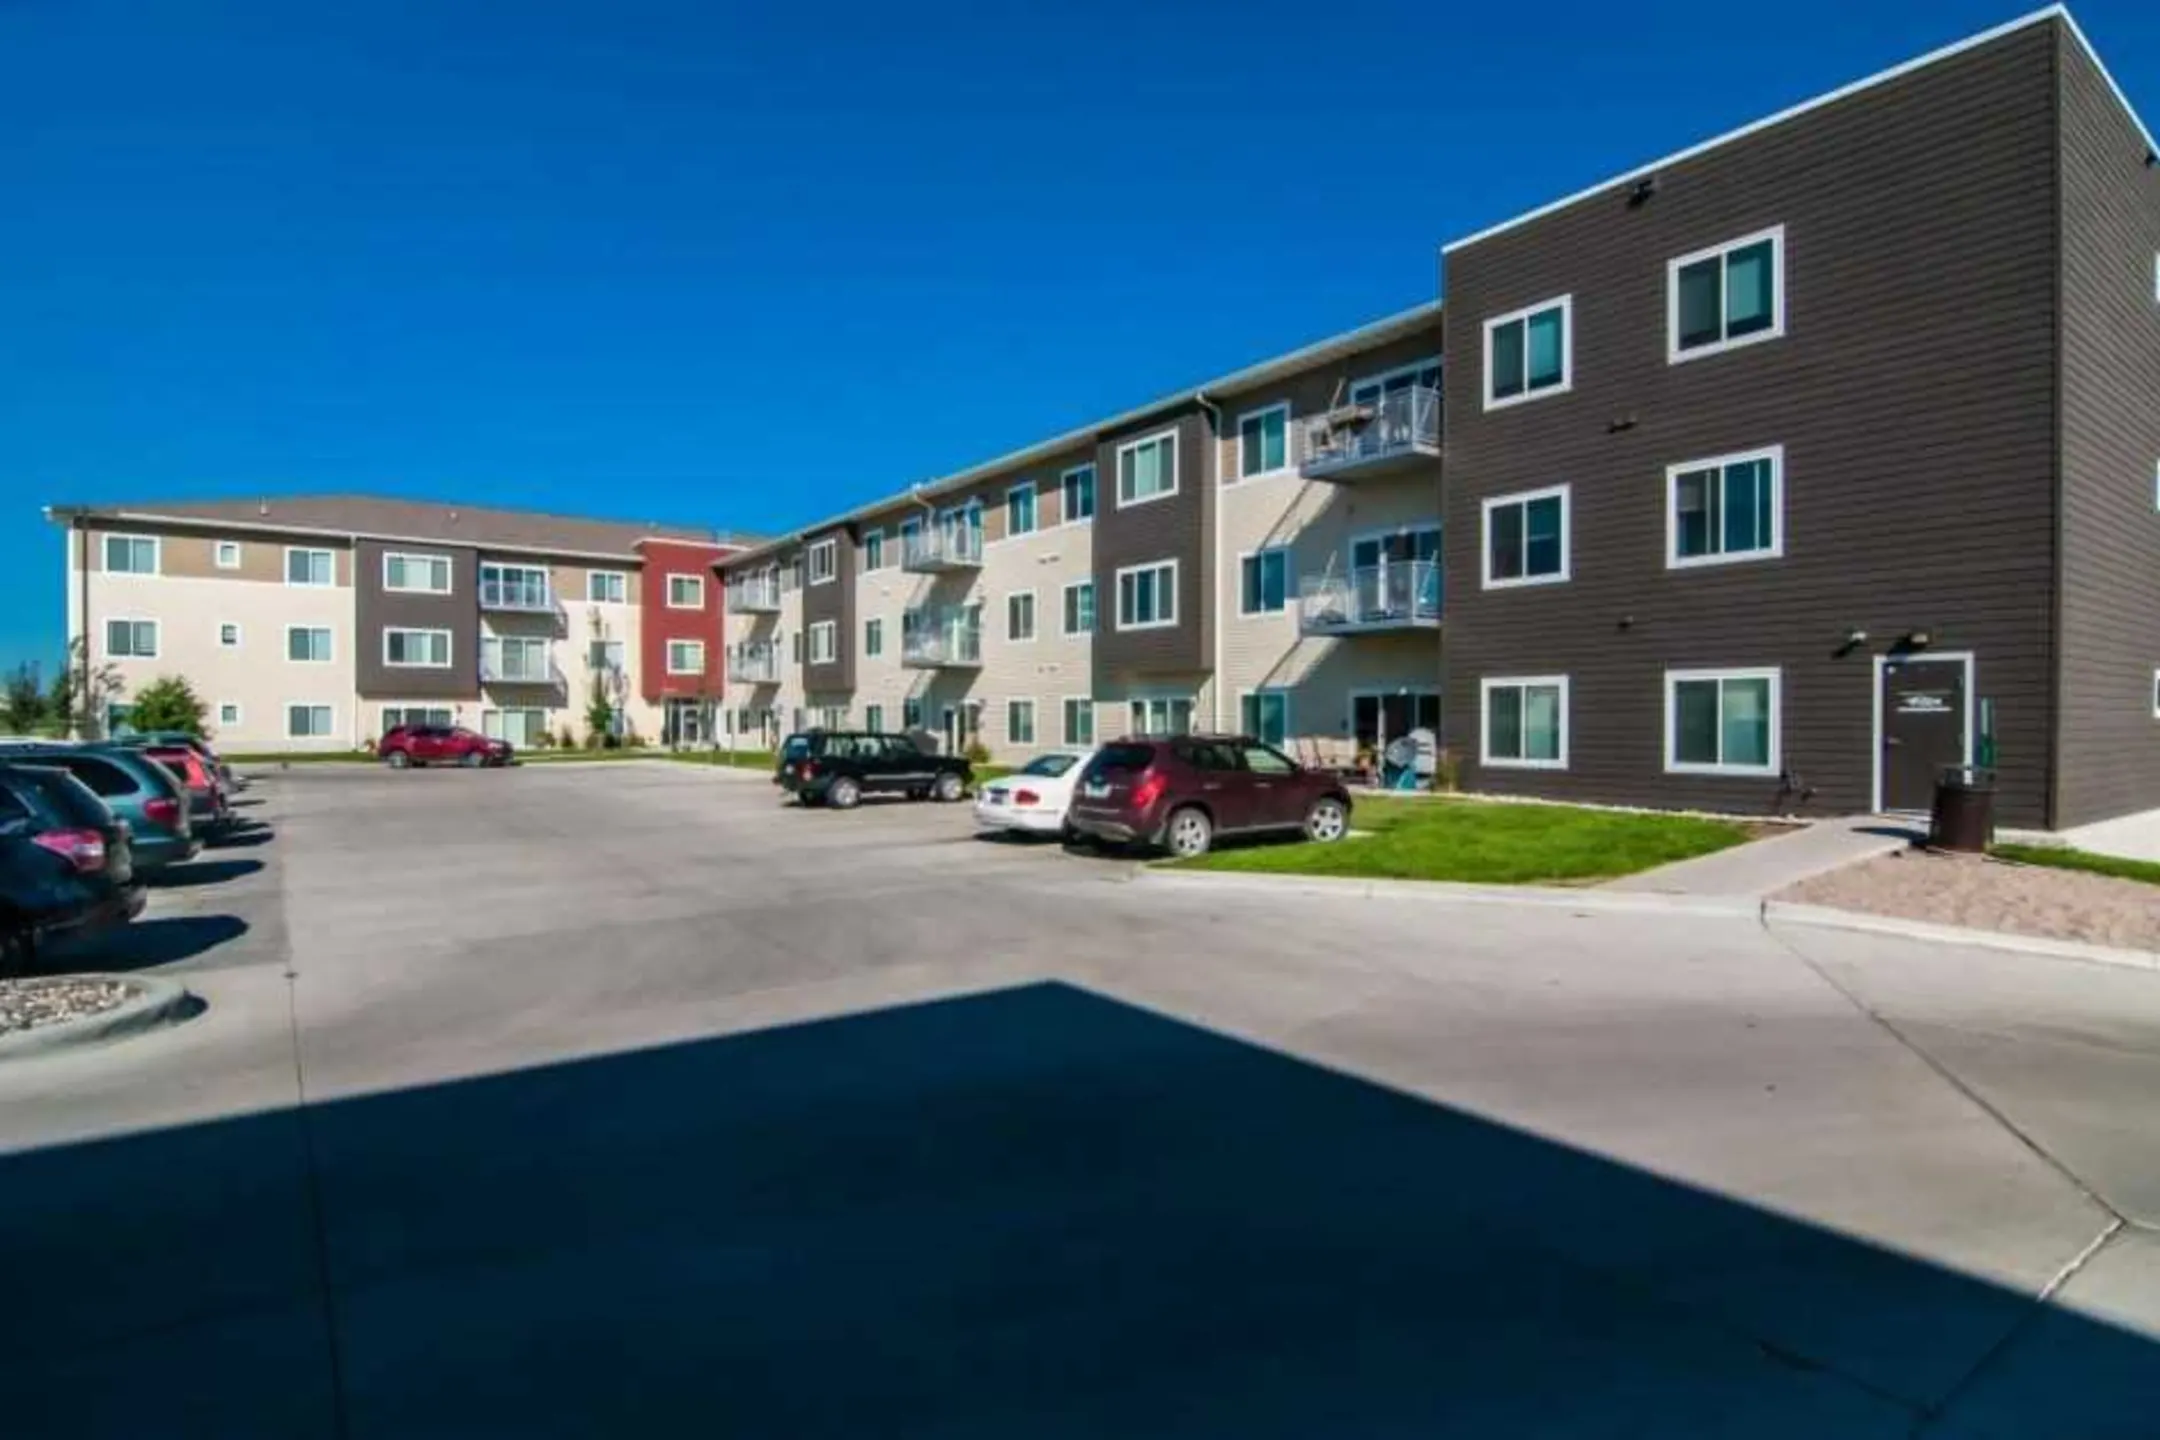 Building - Mallview Apartments - Grand Forks, ND